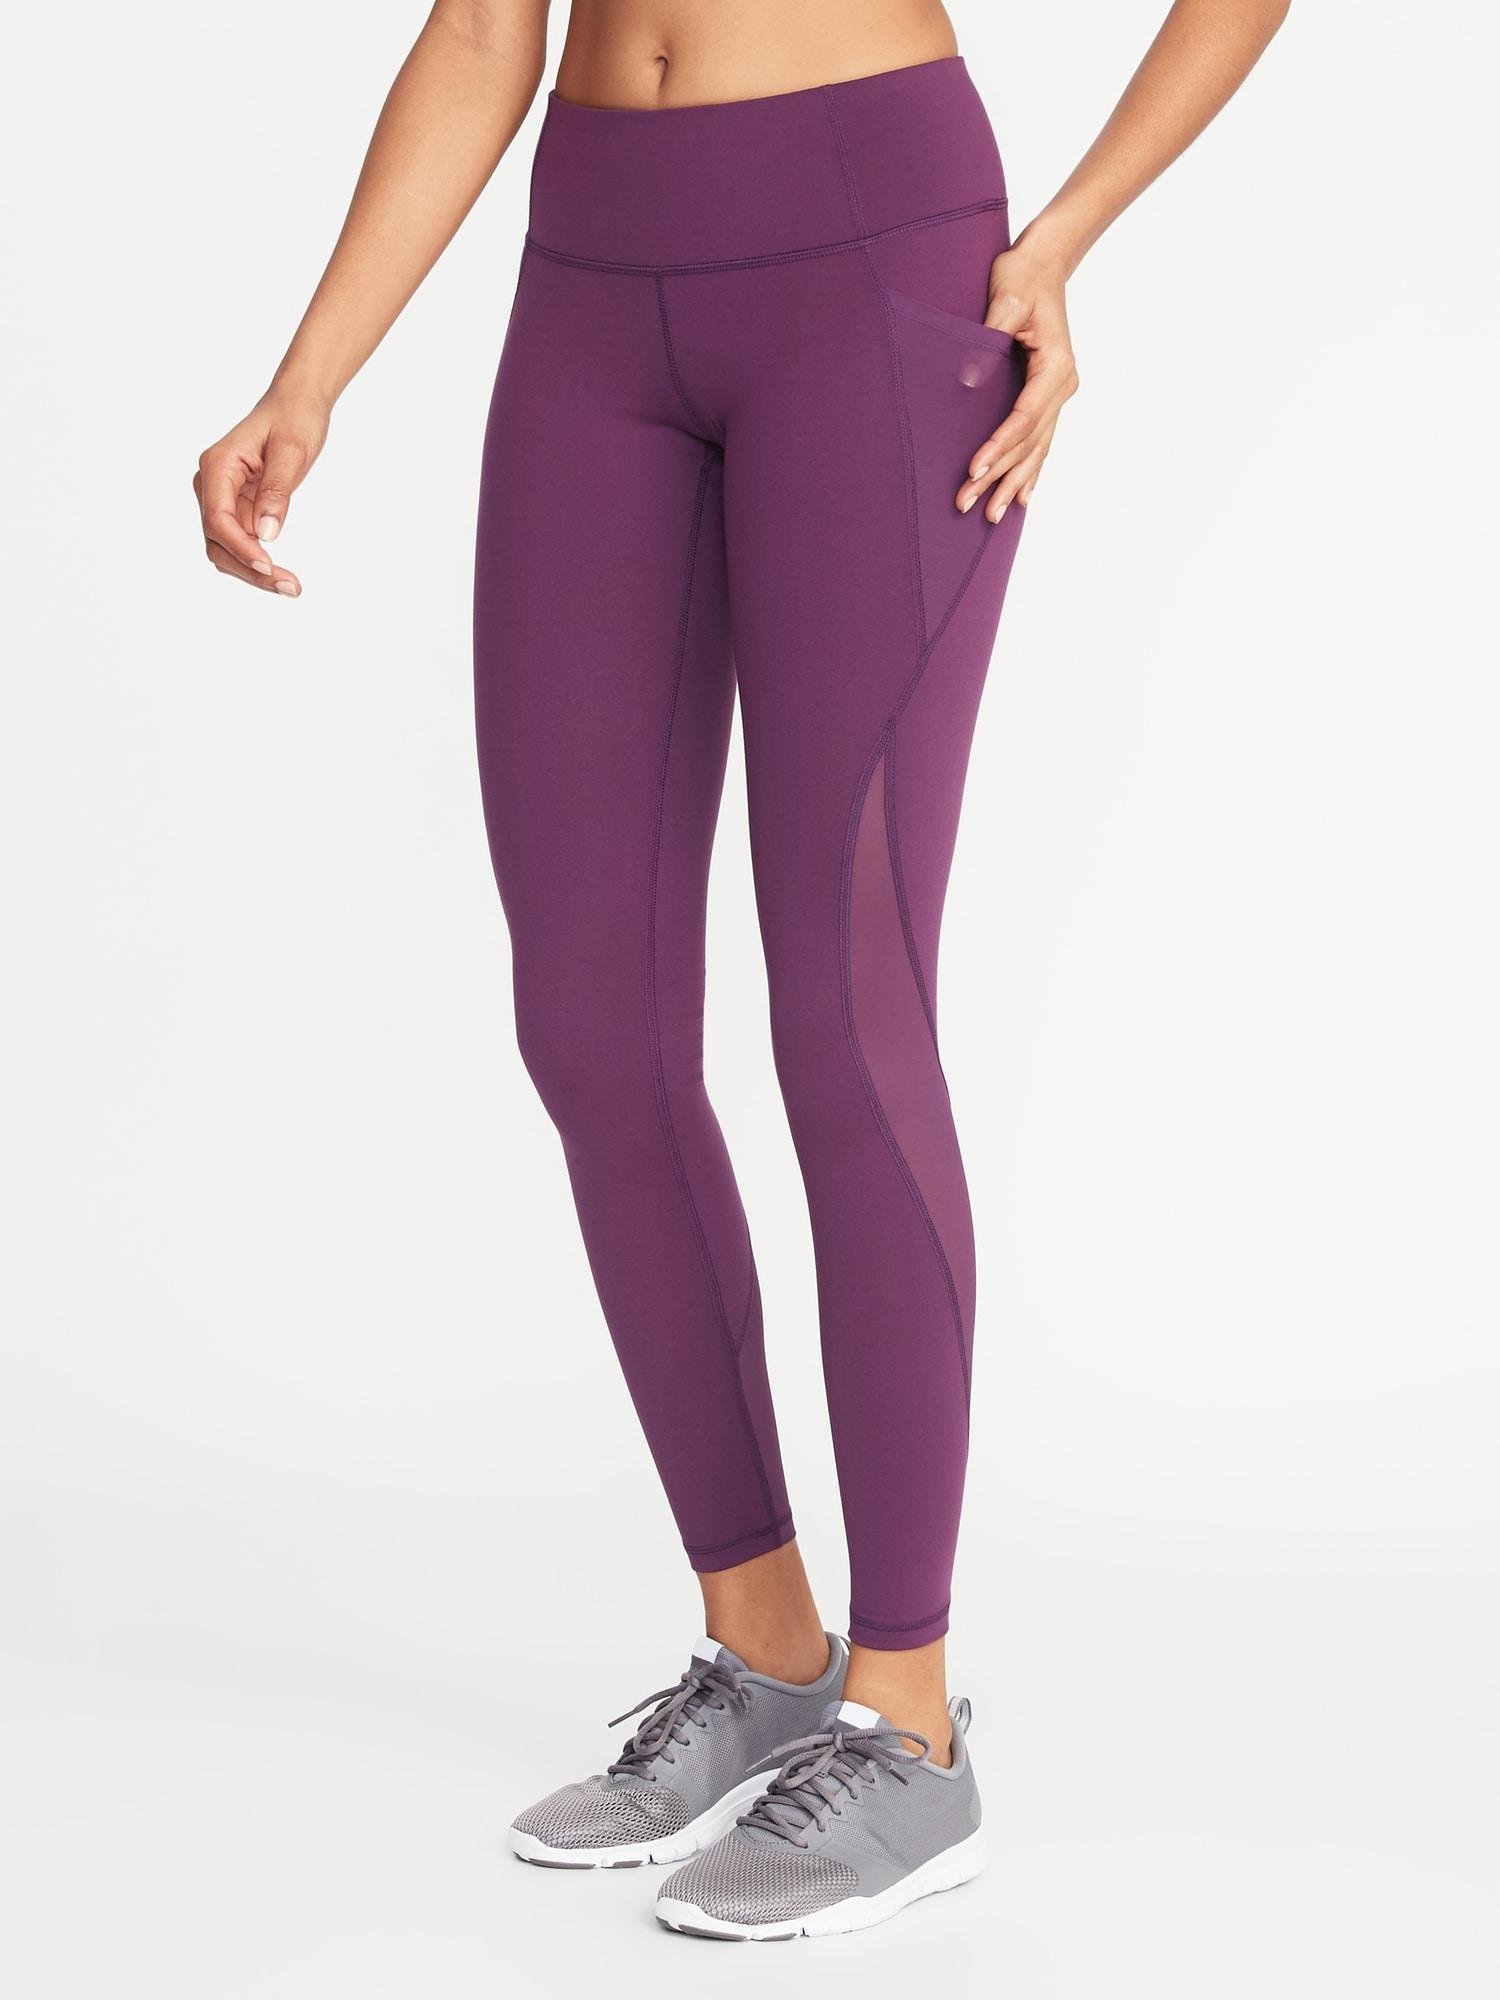 Yoga Pants With Side Pockets  International Society of Precision